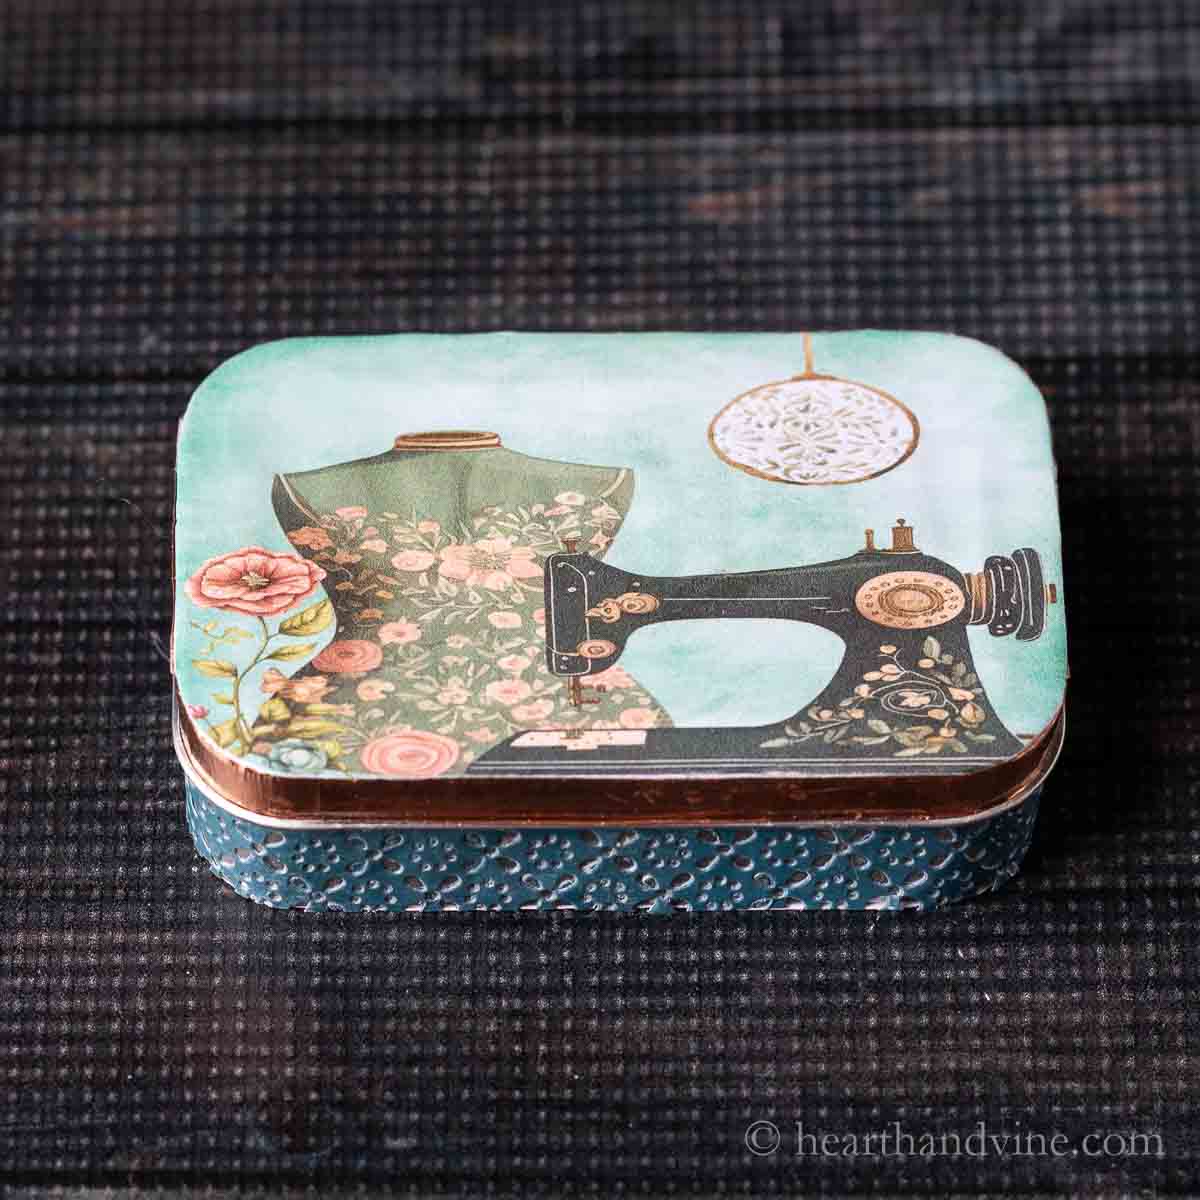 Altoid tin sewing kit with vintage print cover.